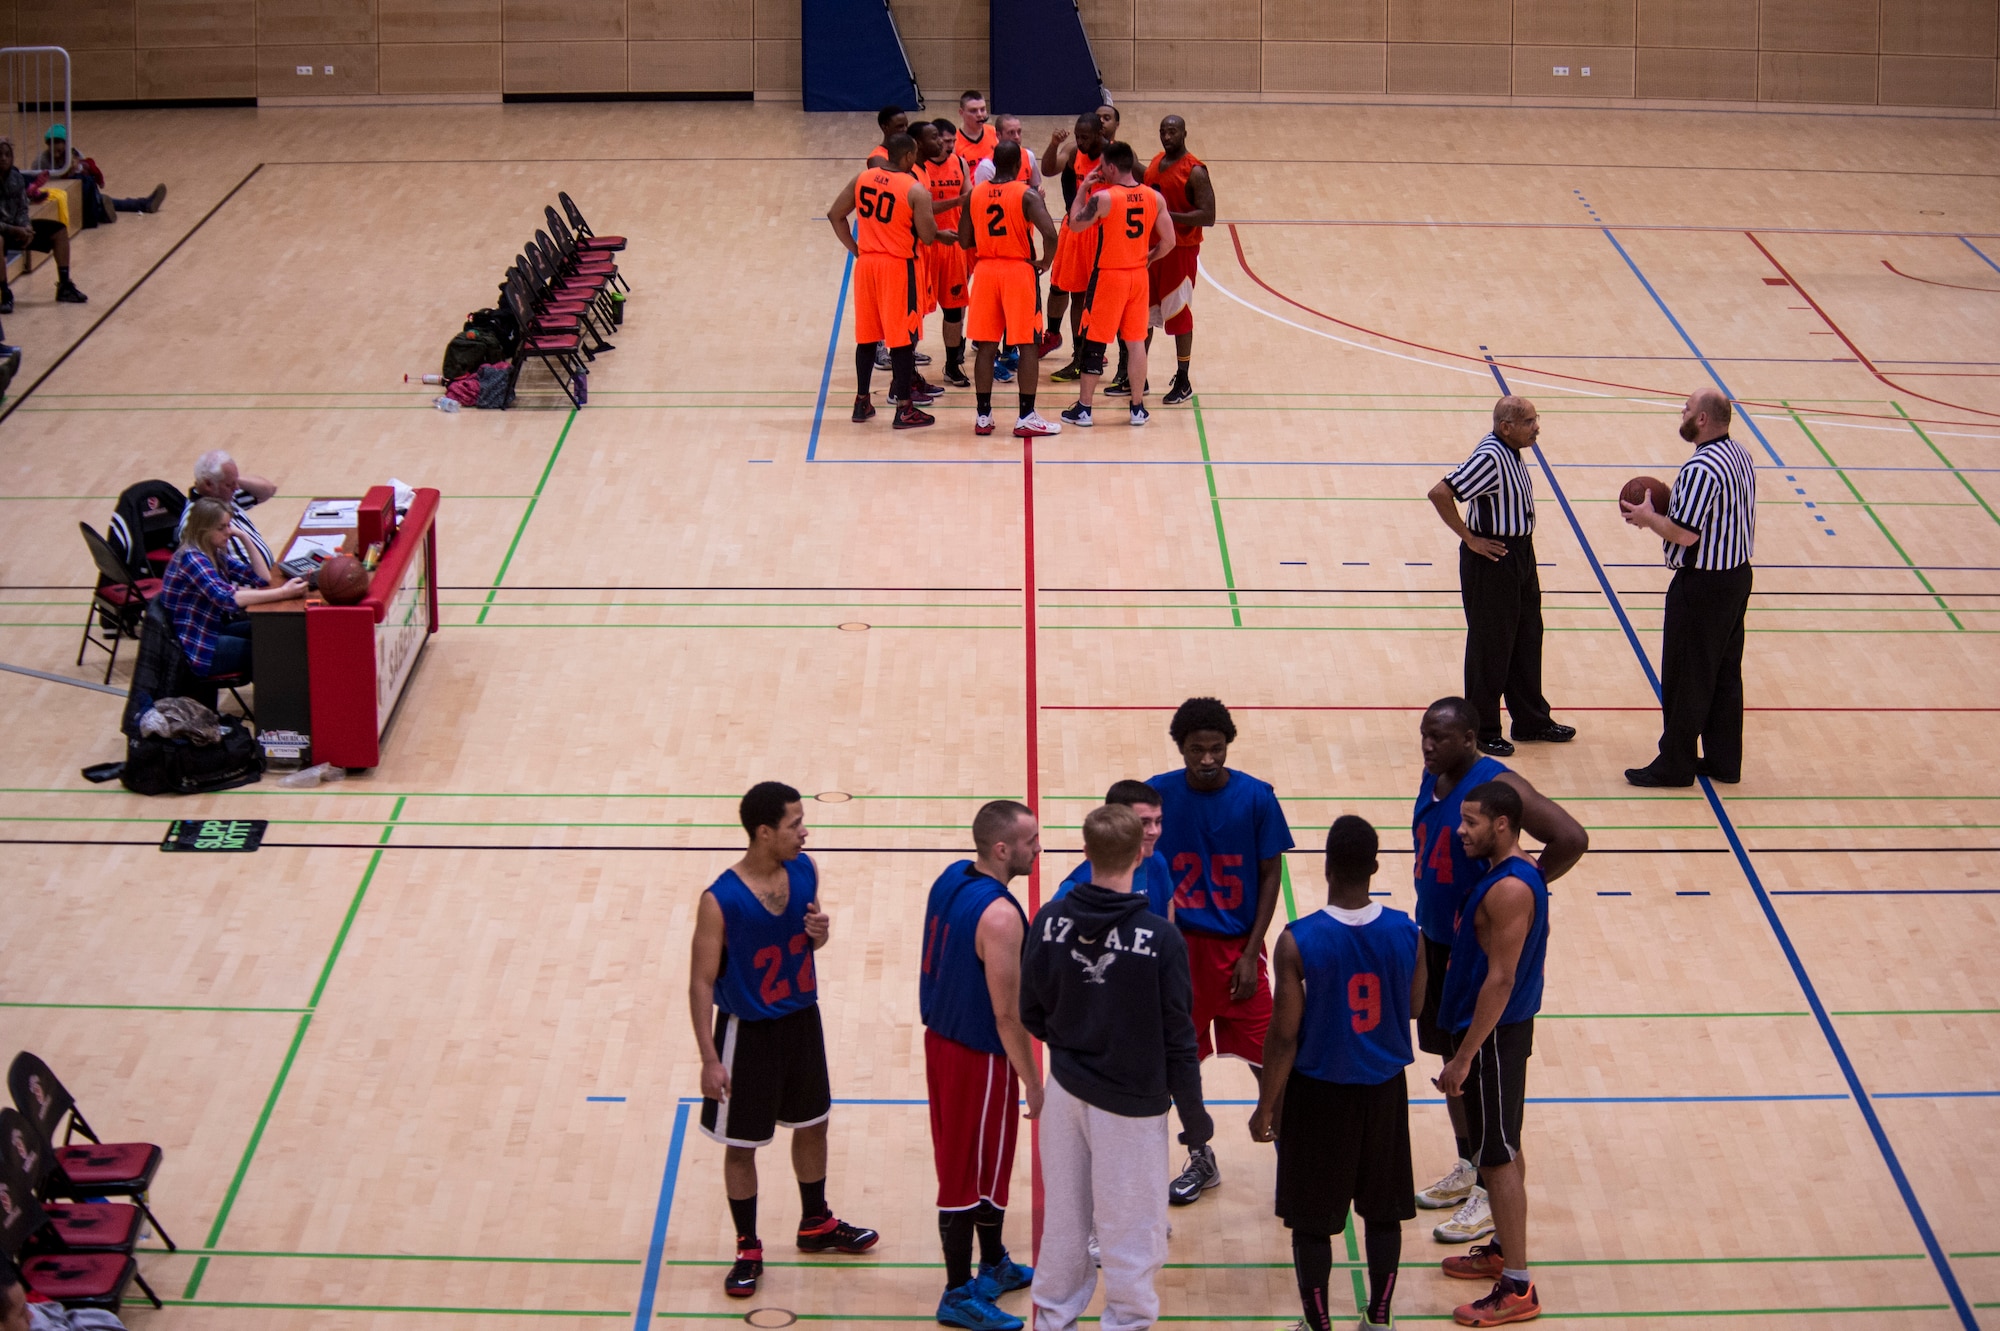 Players and game officials huddle up during a time out during the Intramural Basketball Championship game, inside the George Price Gymnasium Jan. 28, 2016, at Spangdahlem Air Base, Germany. The 52nd LRS won the game with a final score of 54-52. (U.S. Air Force photo by Senior Airman Rusty Frank/Released)